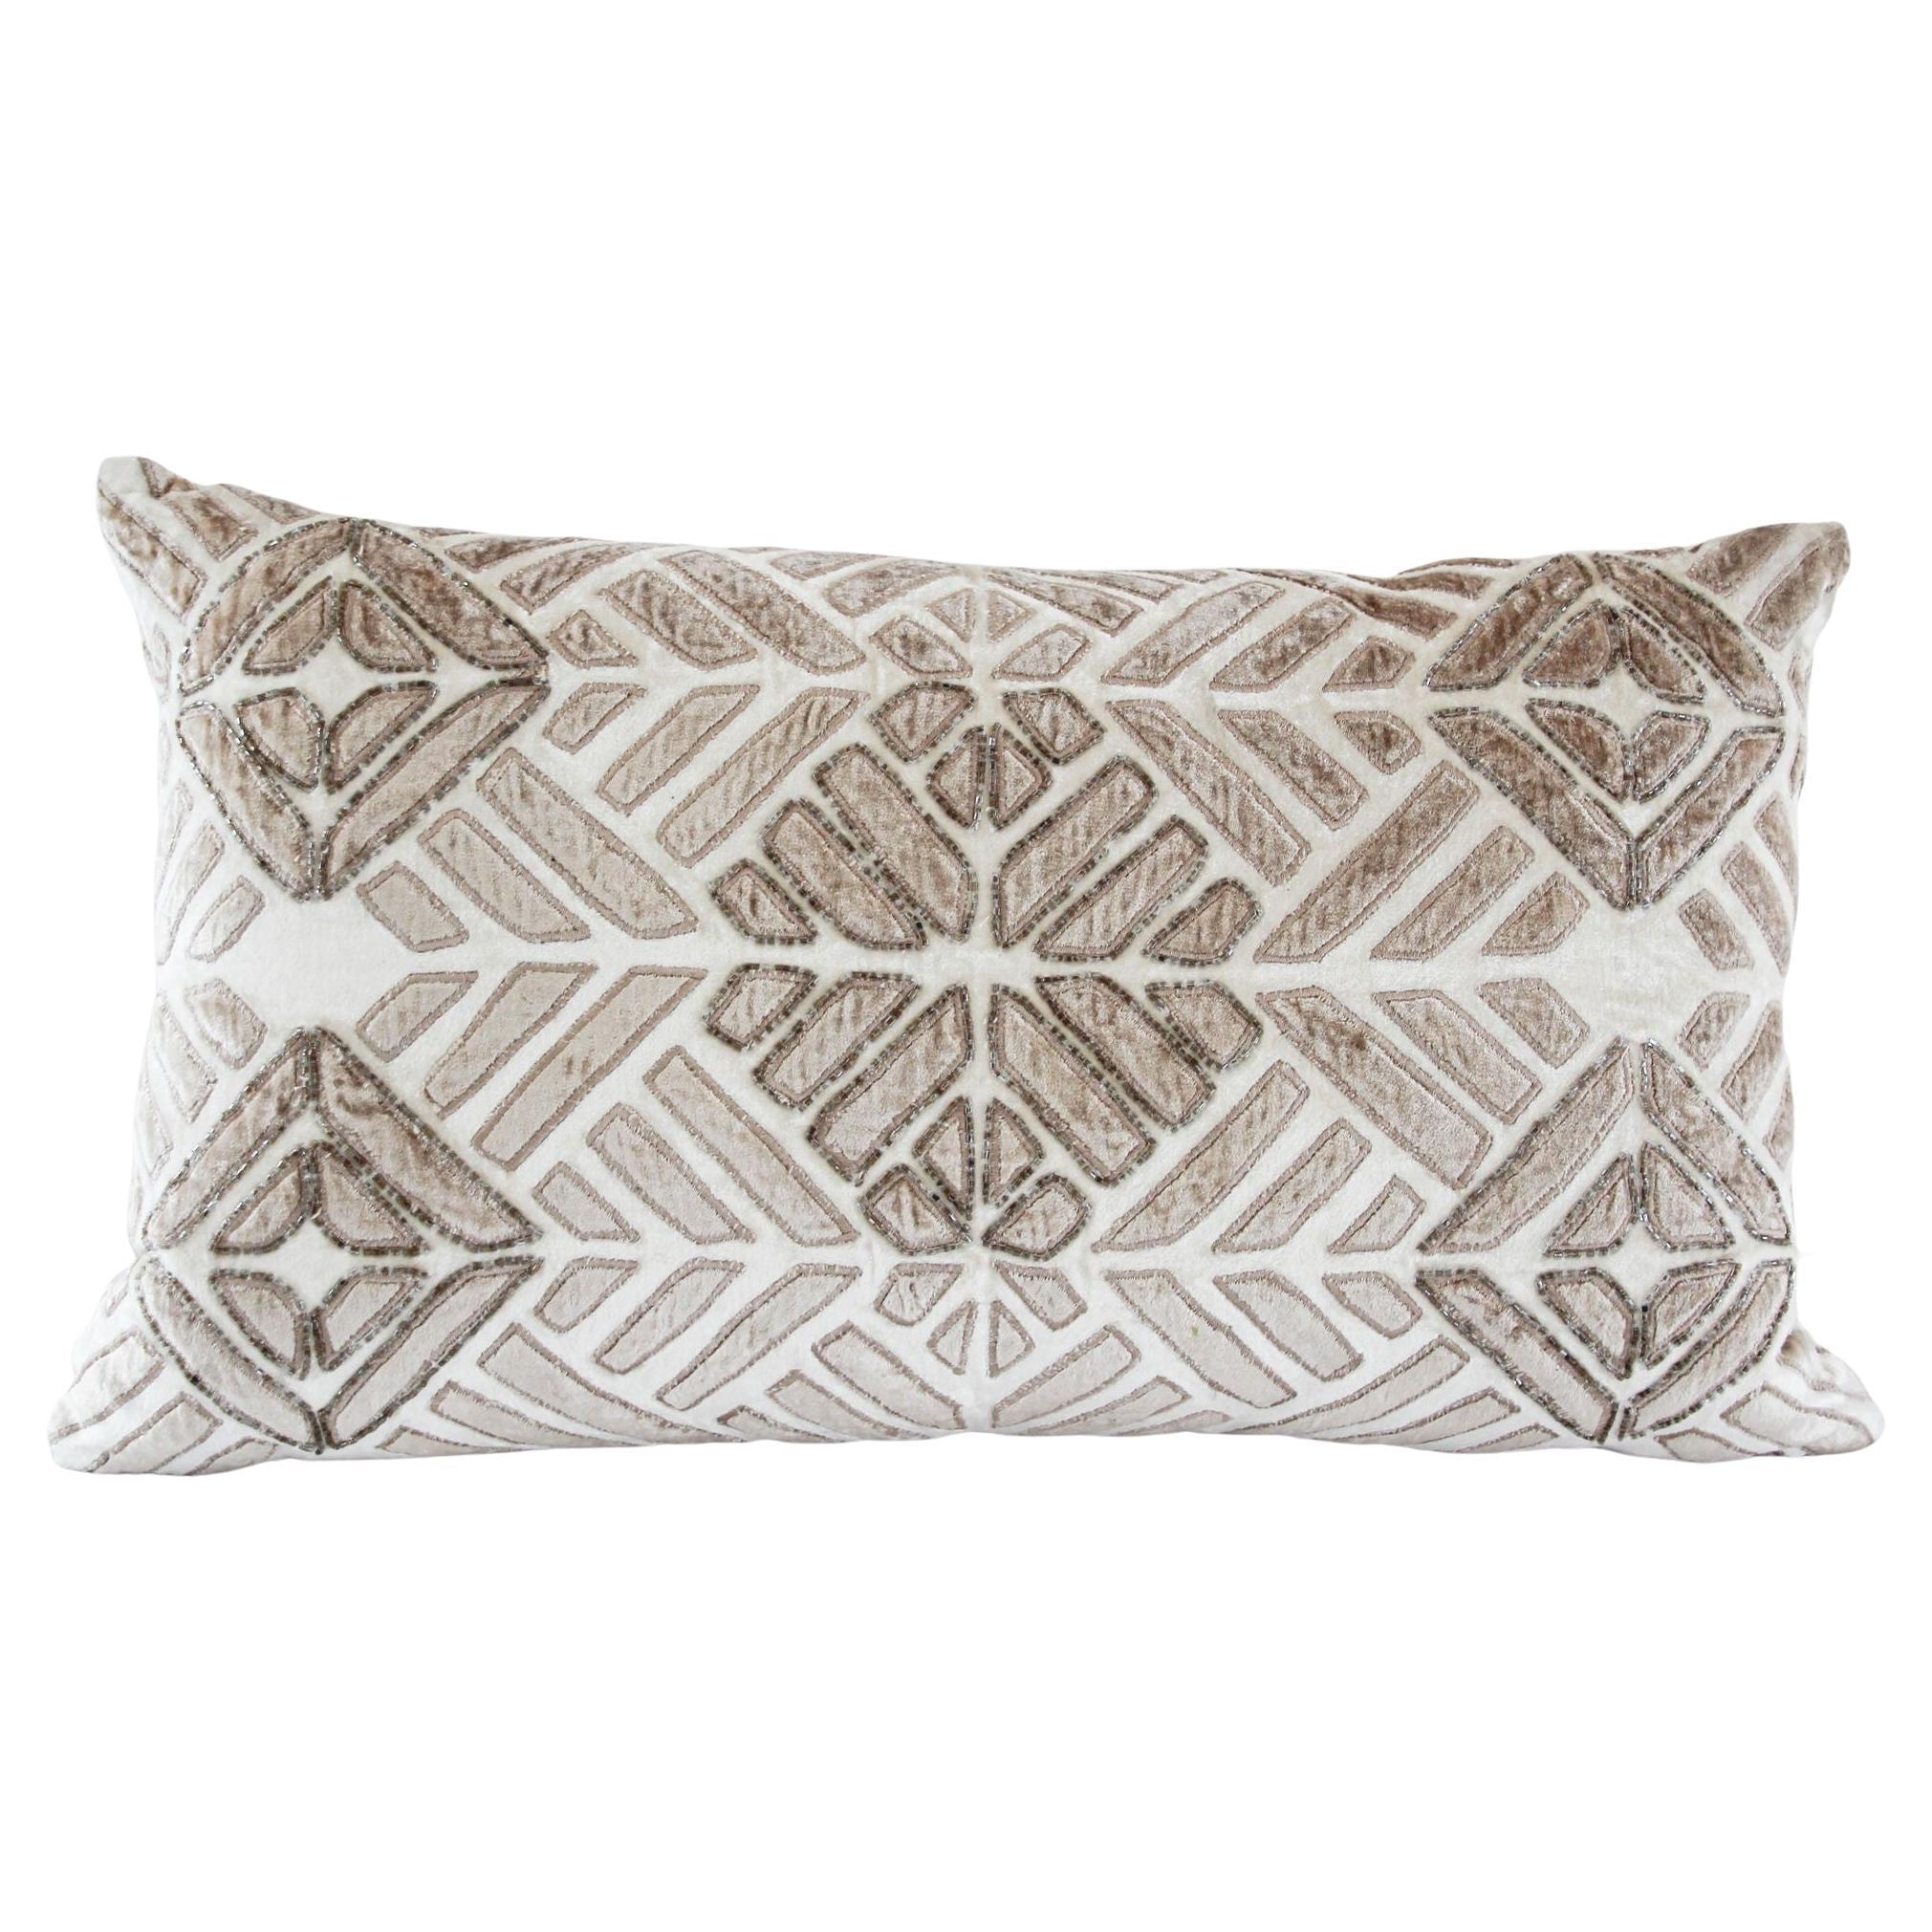 Vintage Taupe and Ivory Cut Velvet Pillow with Metallic Beads For Sale